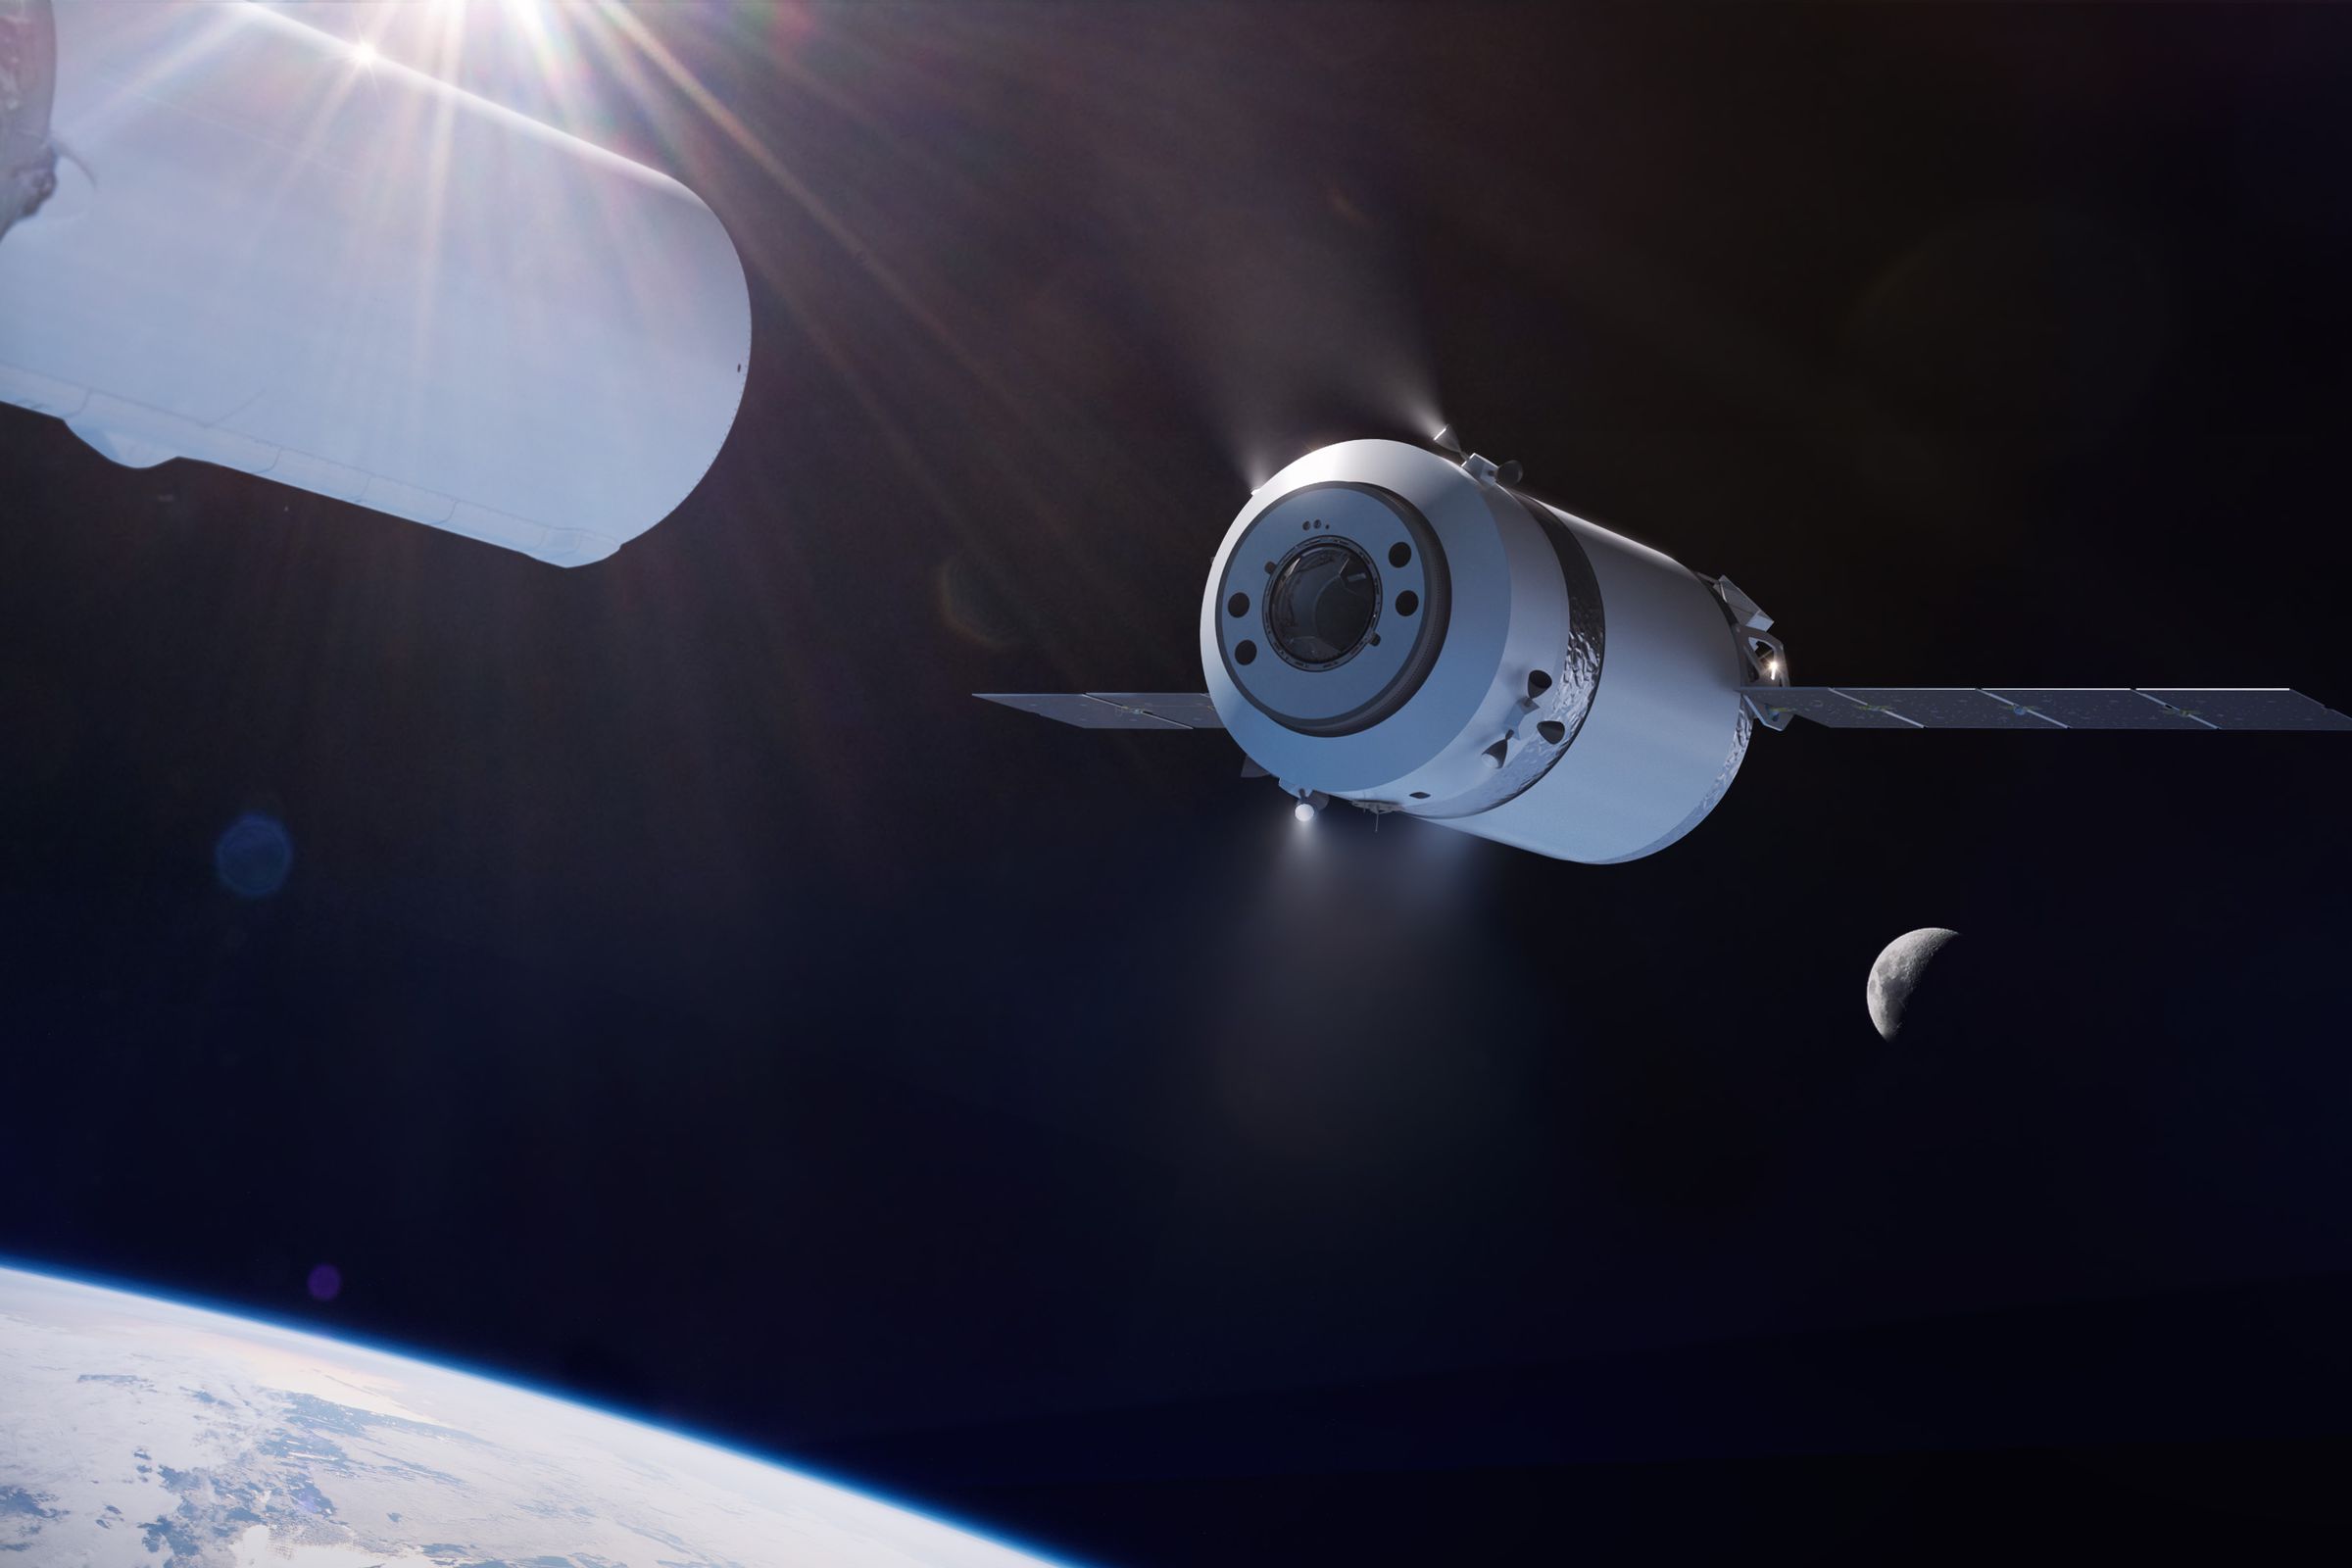 An artistic rendering of SpaceX’s proposed Dragon XL cargo spacecraft